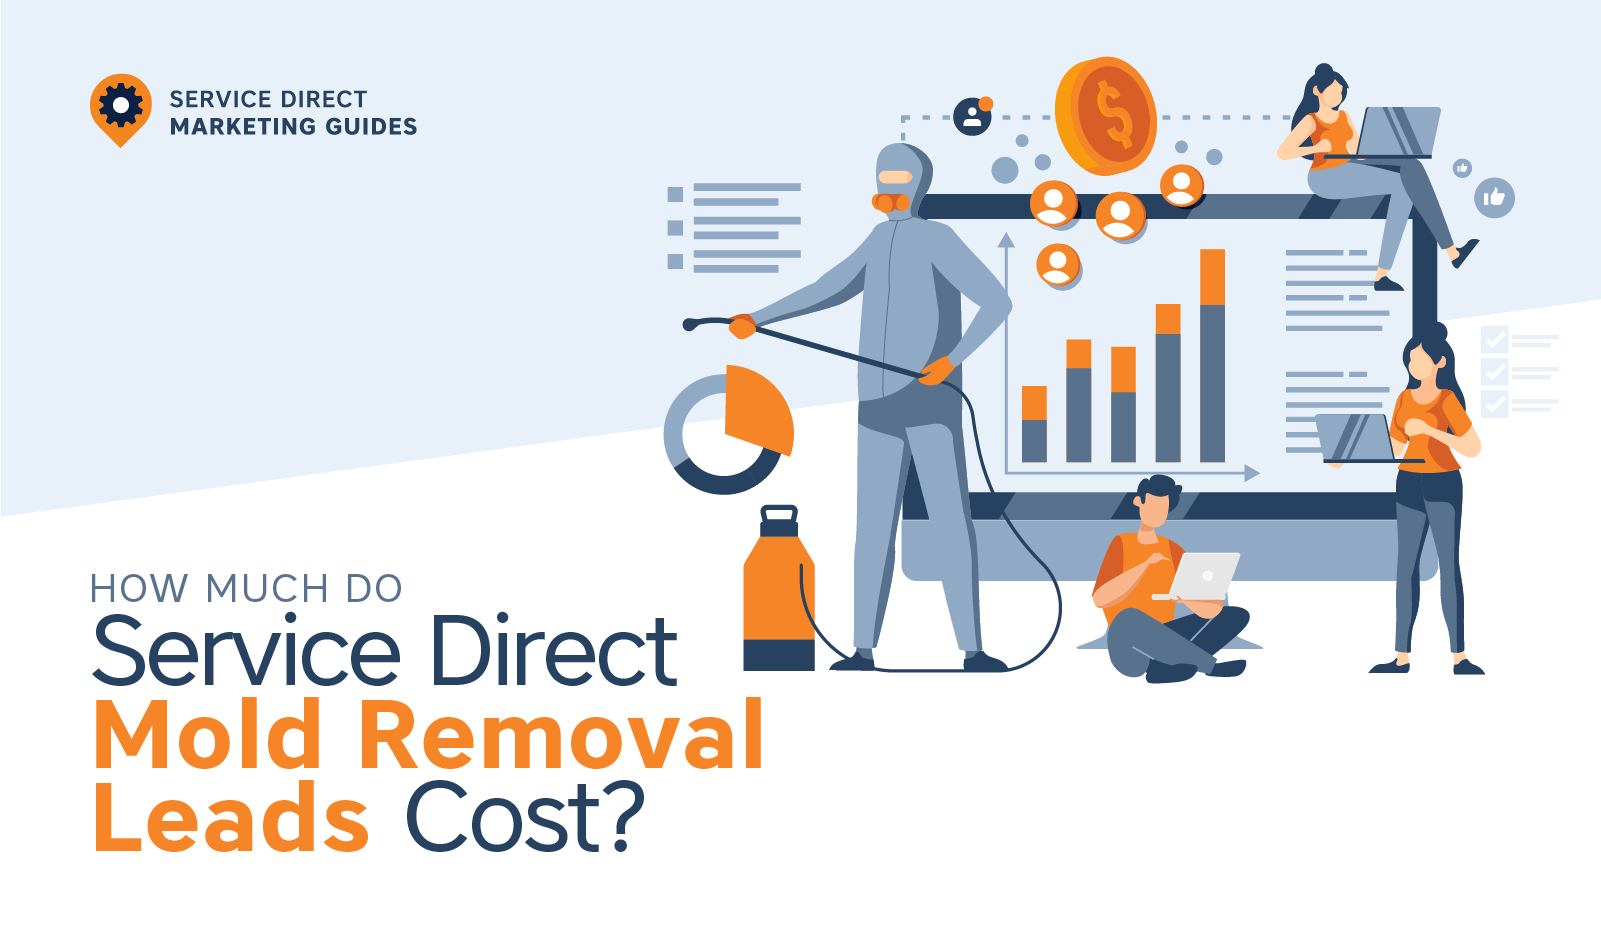 How Much Do Service Direct Mold Removal Leads Cost?